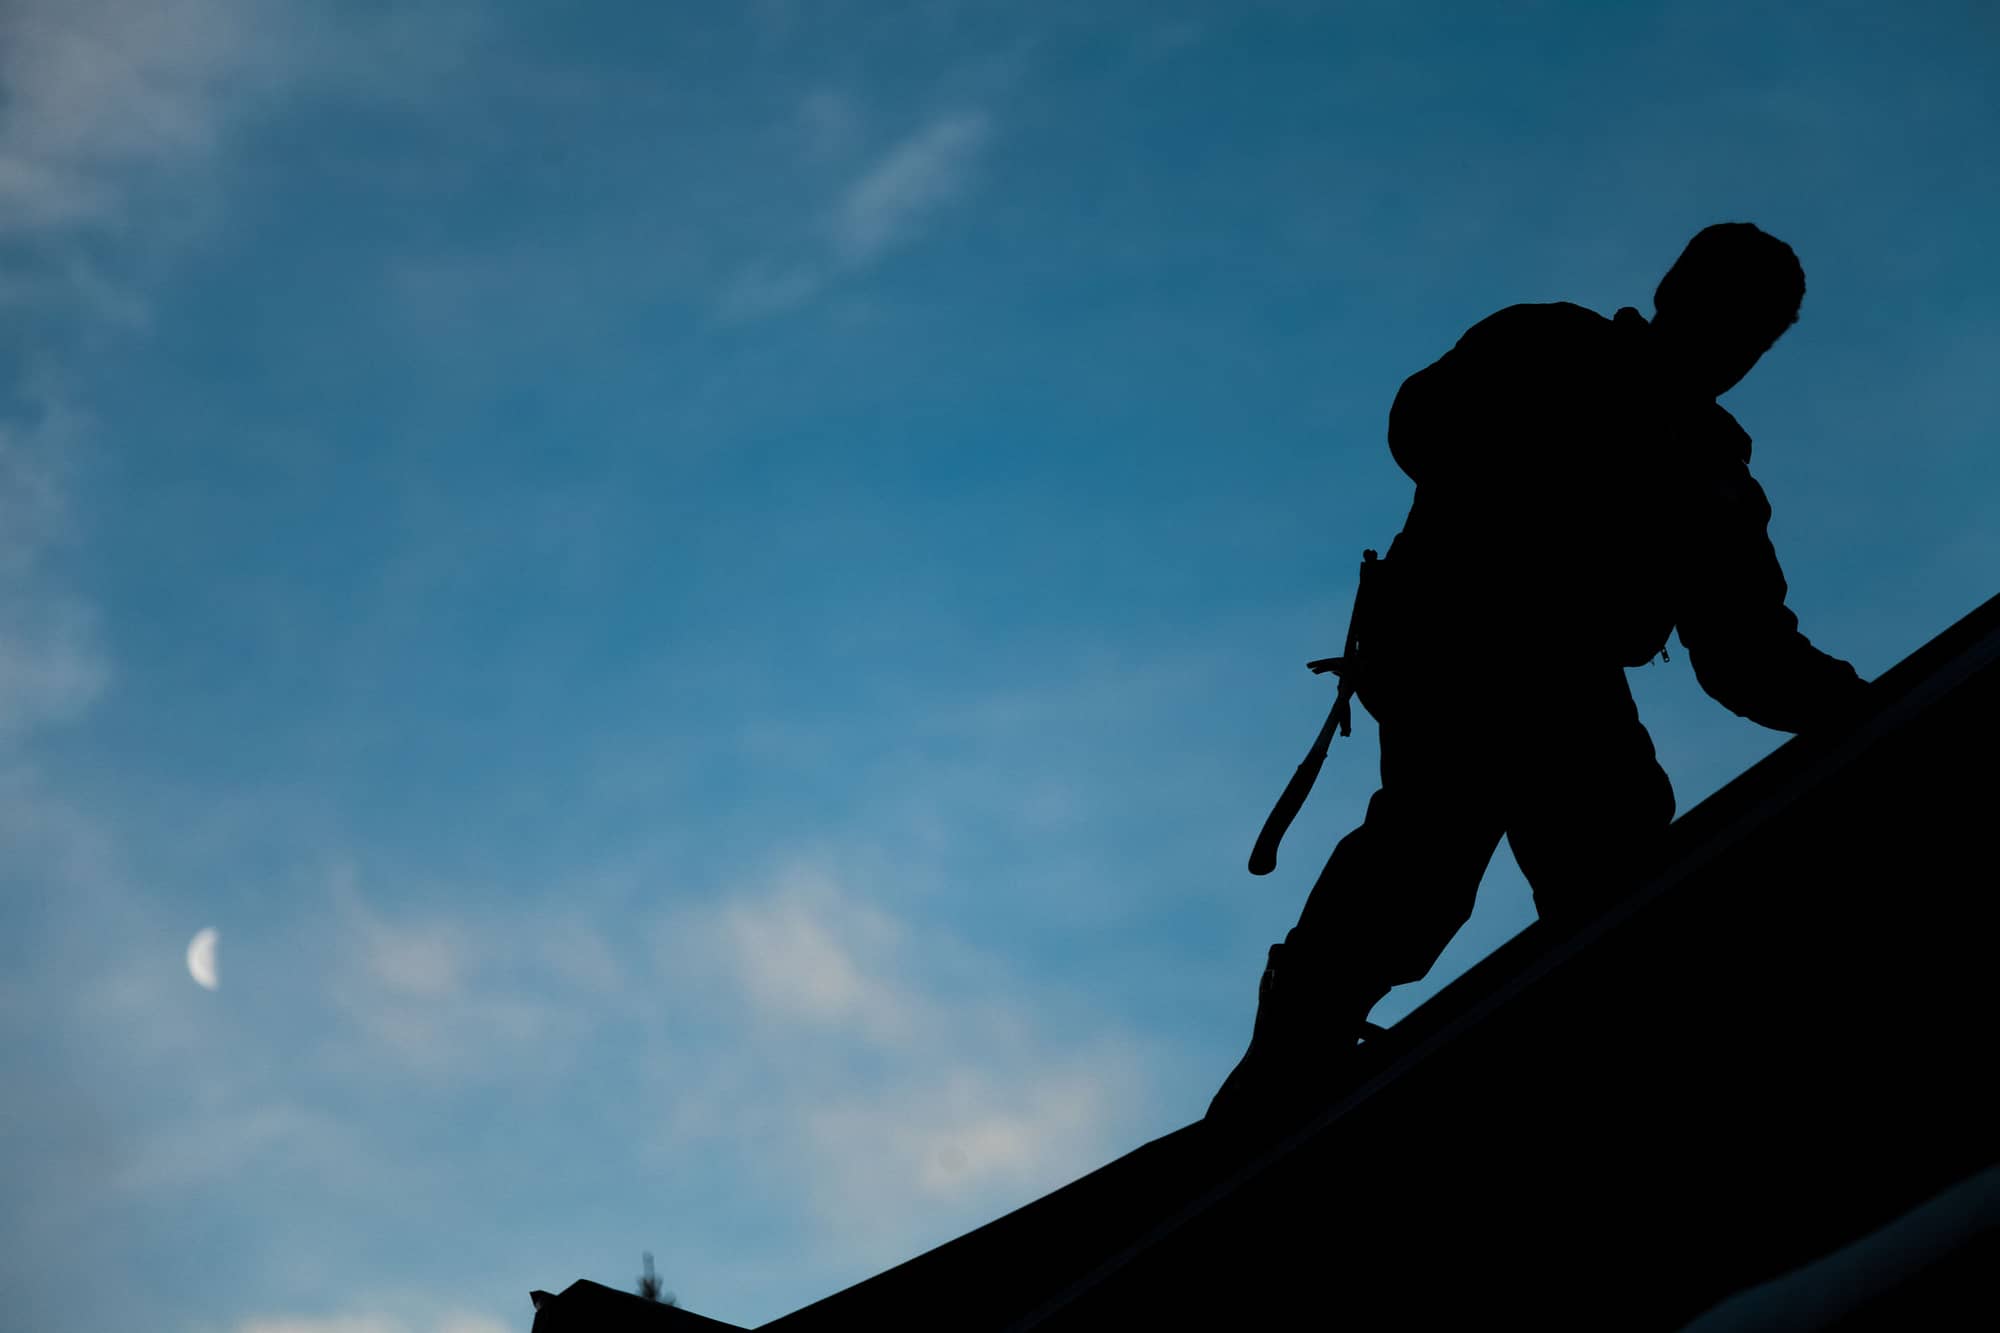 Contractor in Silhouette working on a Roof Top with blue Sky in Background - roofing contractors - Home Crafters